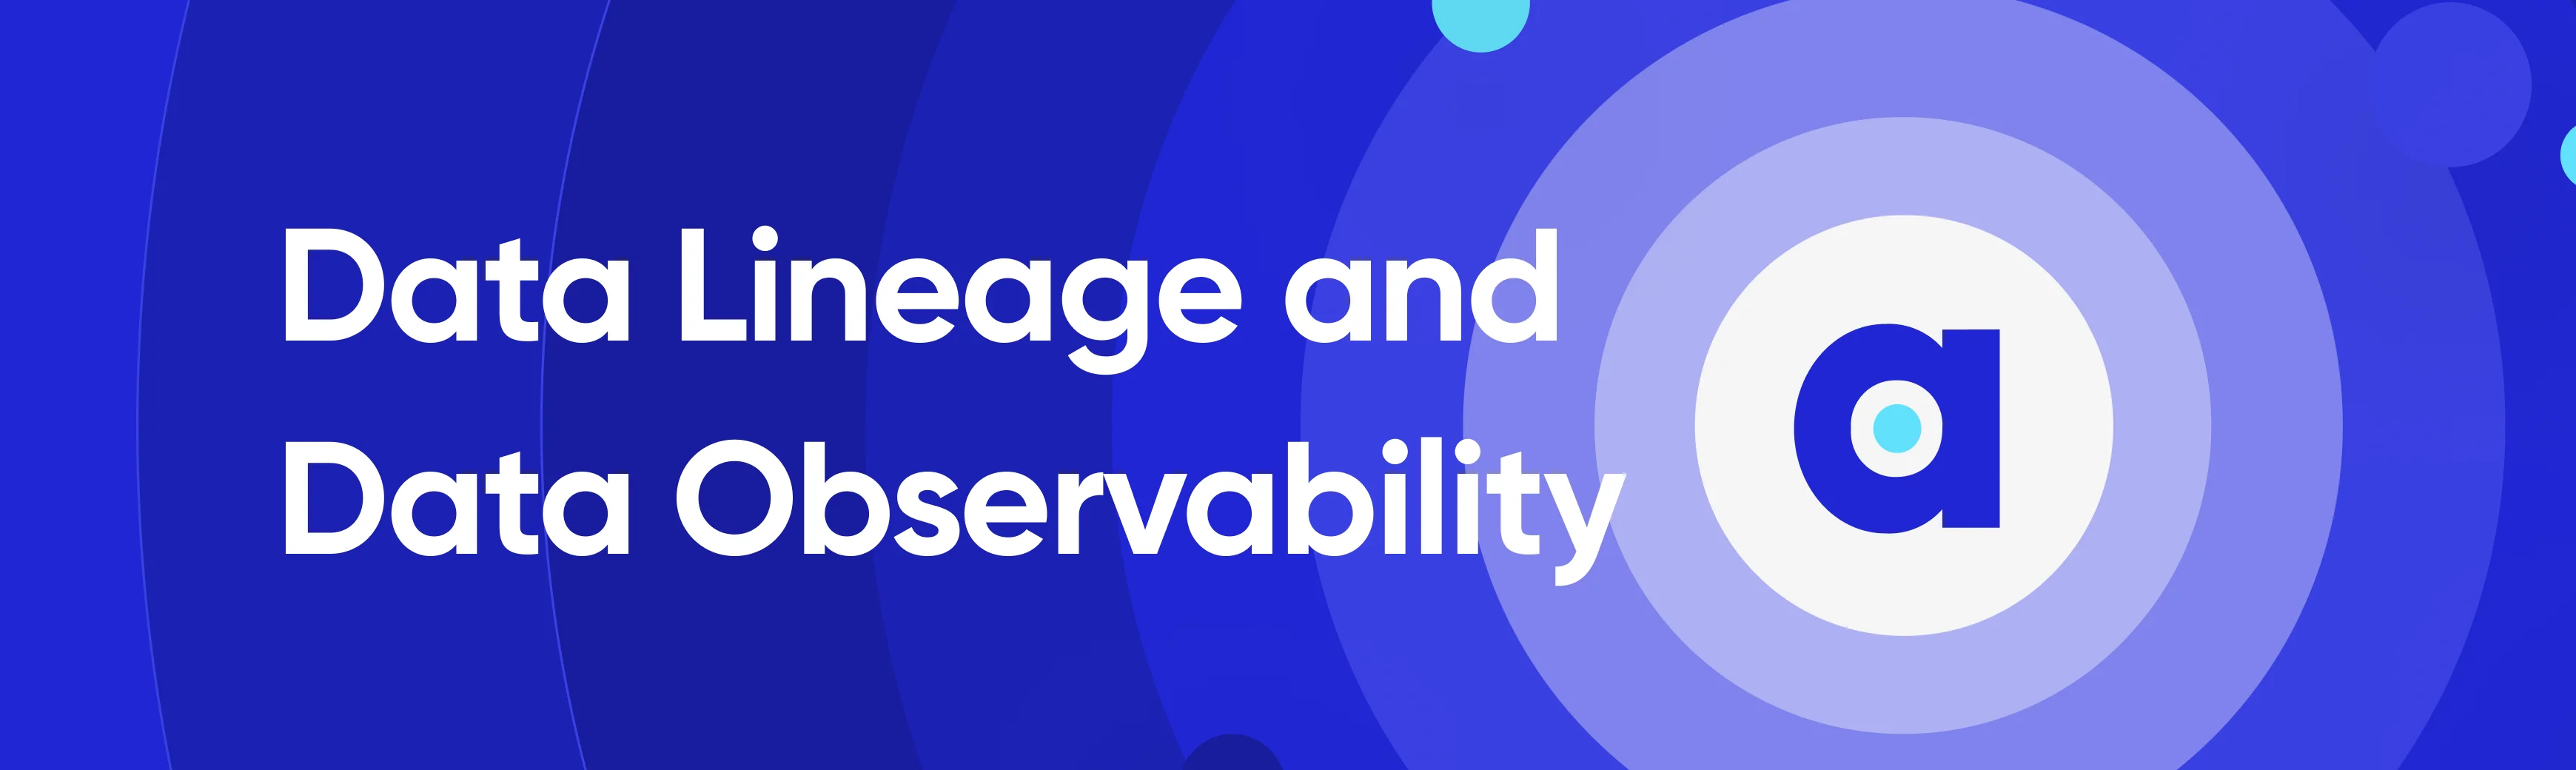 Data Lineage and Data Observability